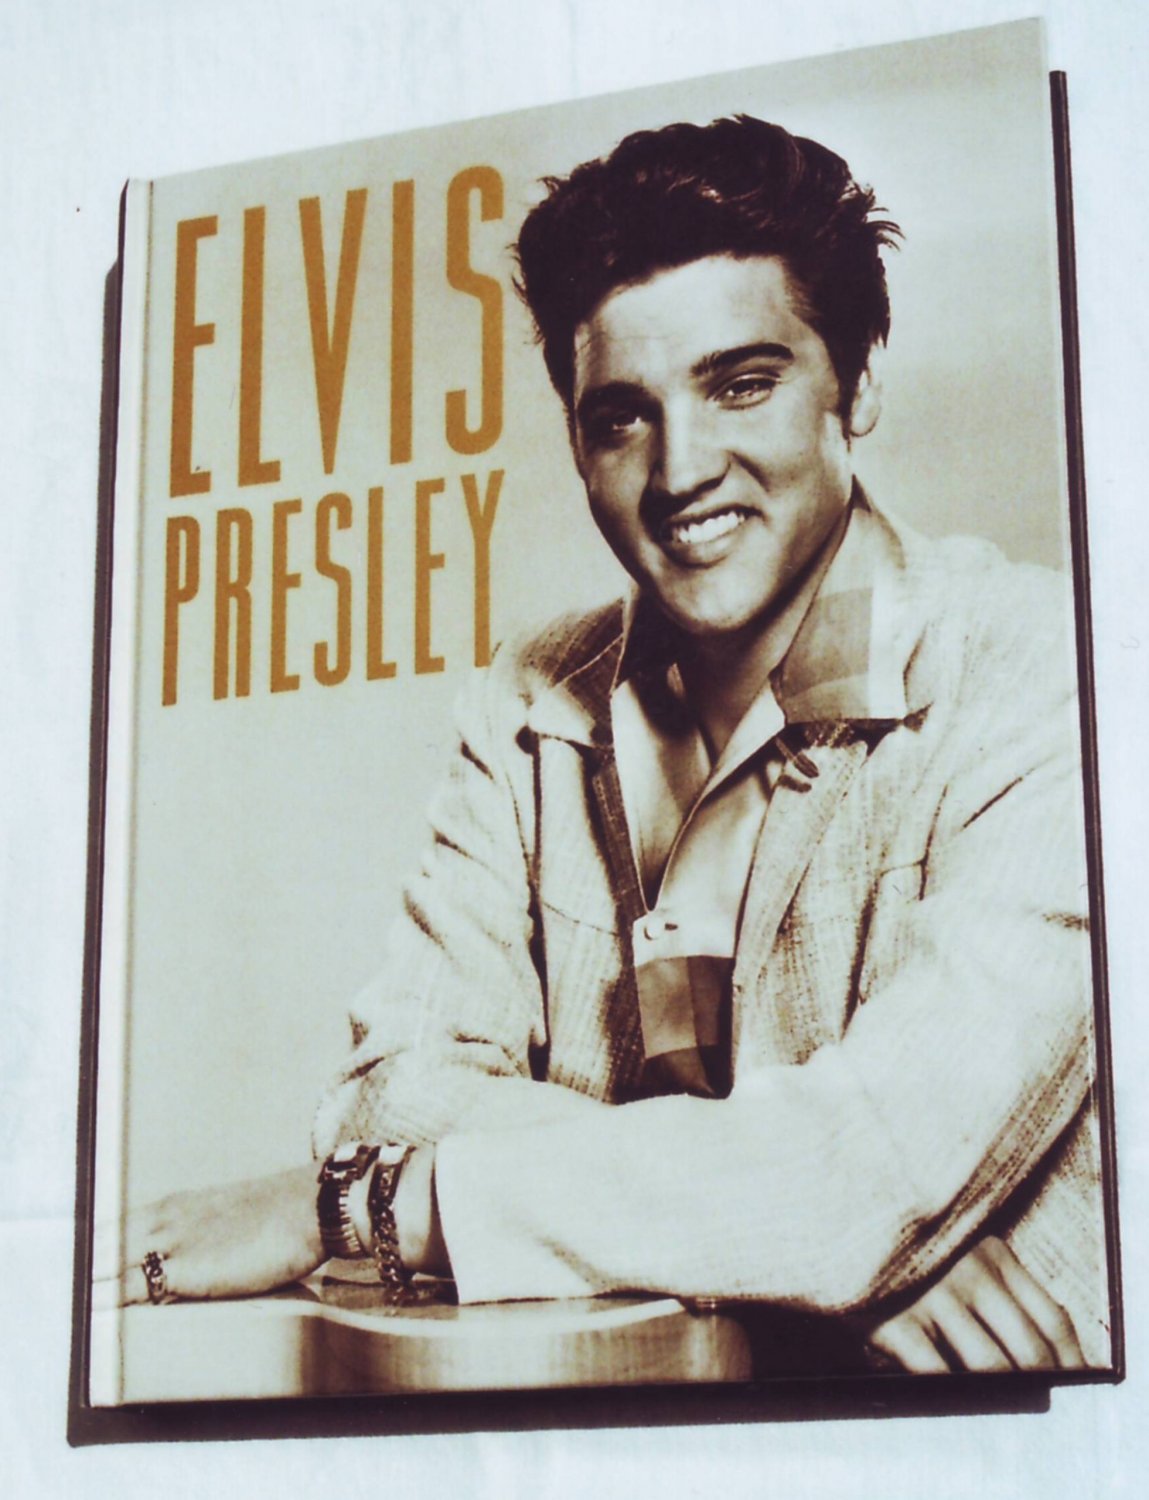 BY MARIE CLAYTON ICONS OF OUR TIME HARDCOVER ELVIS PRESLEY 2009 2585A 